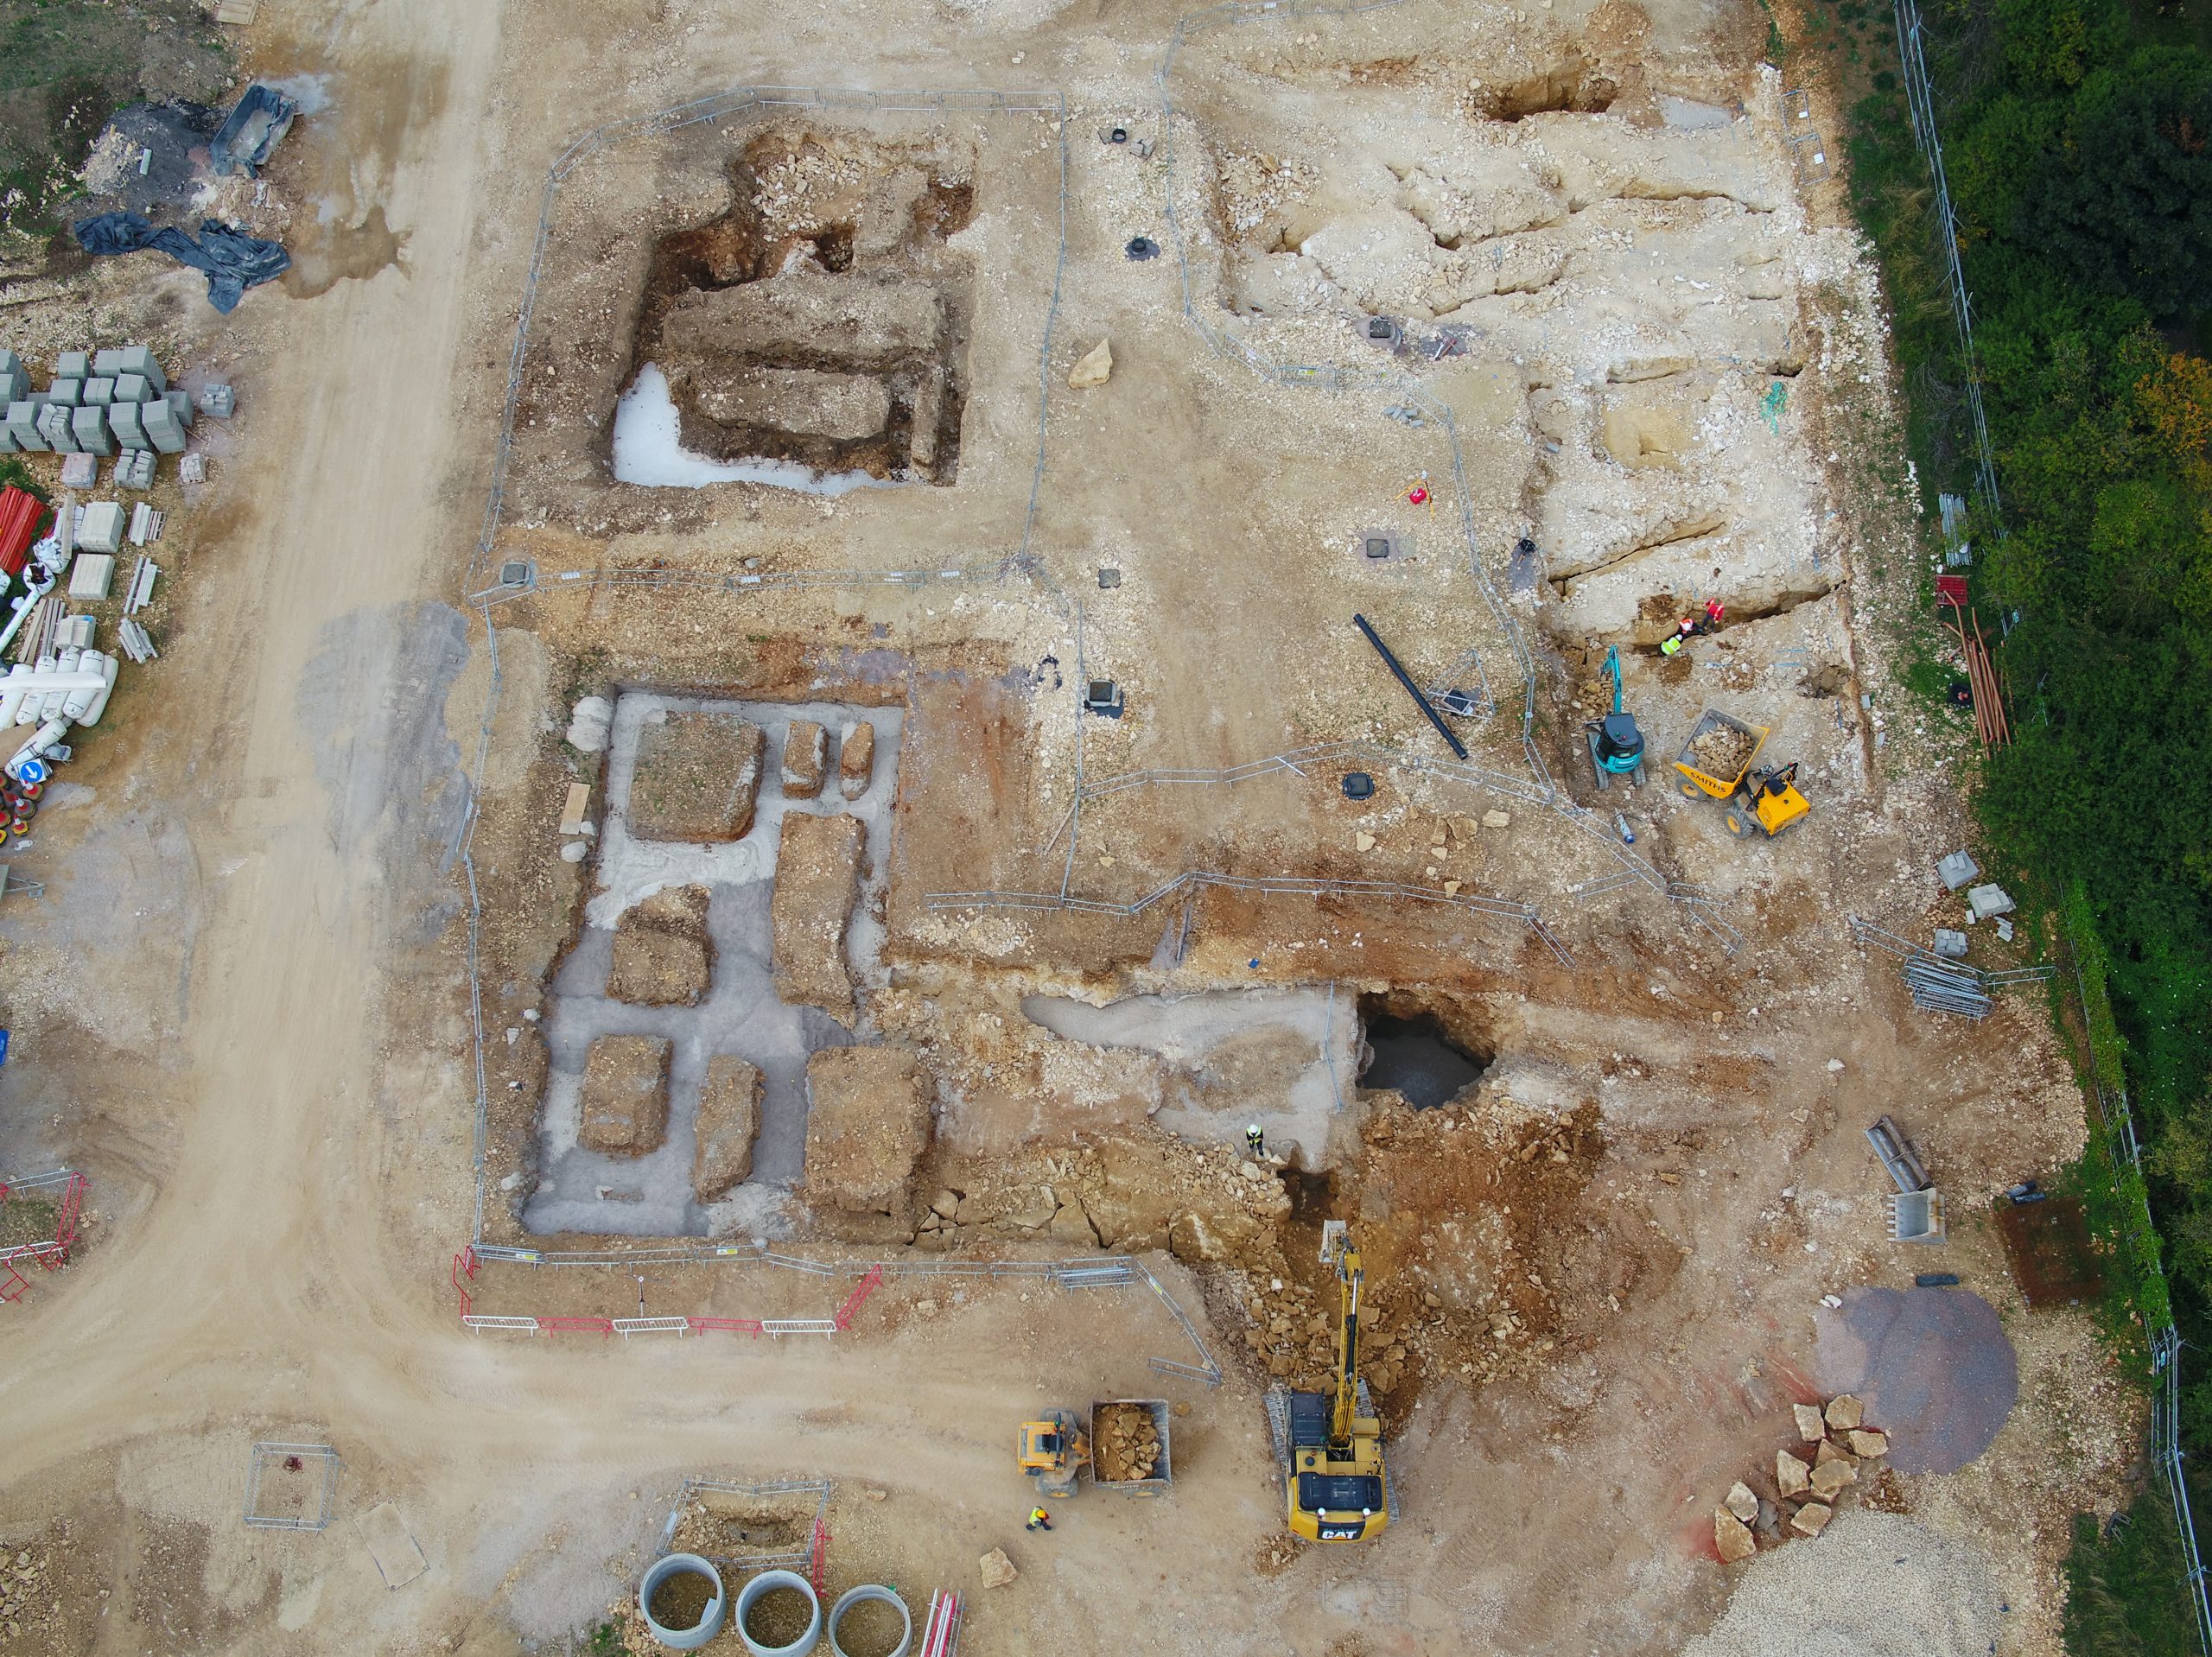 site survery done with drone